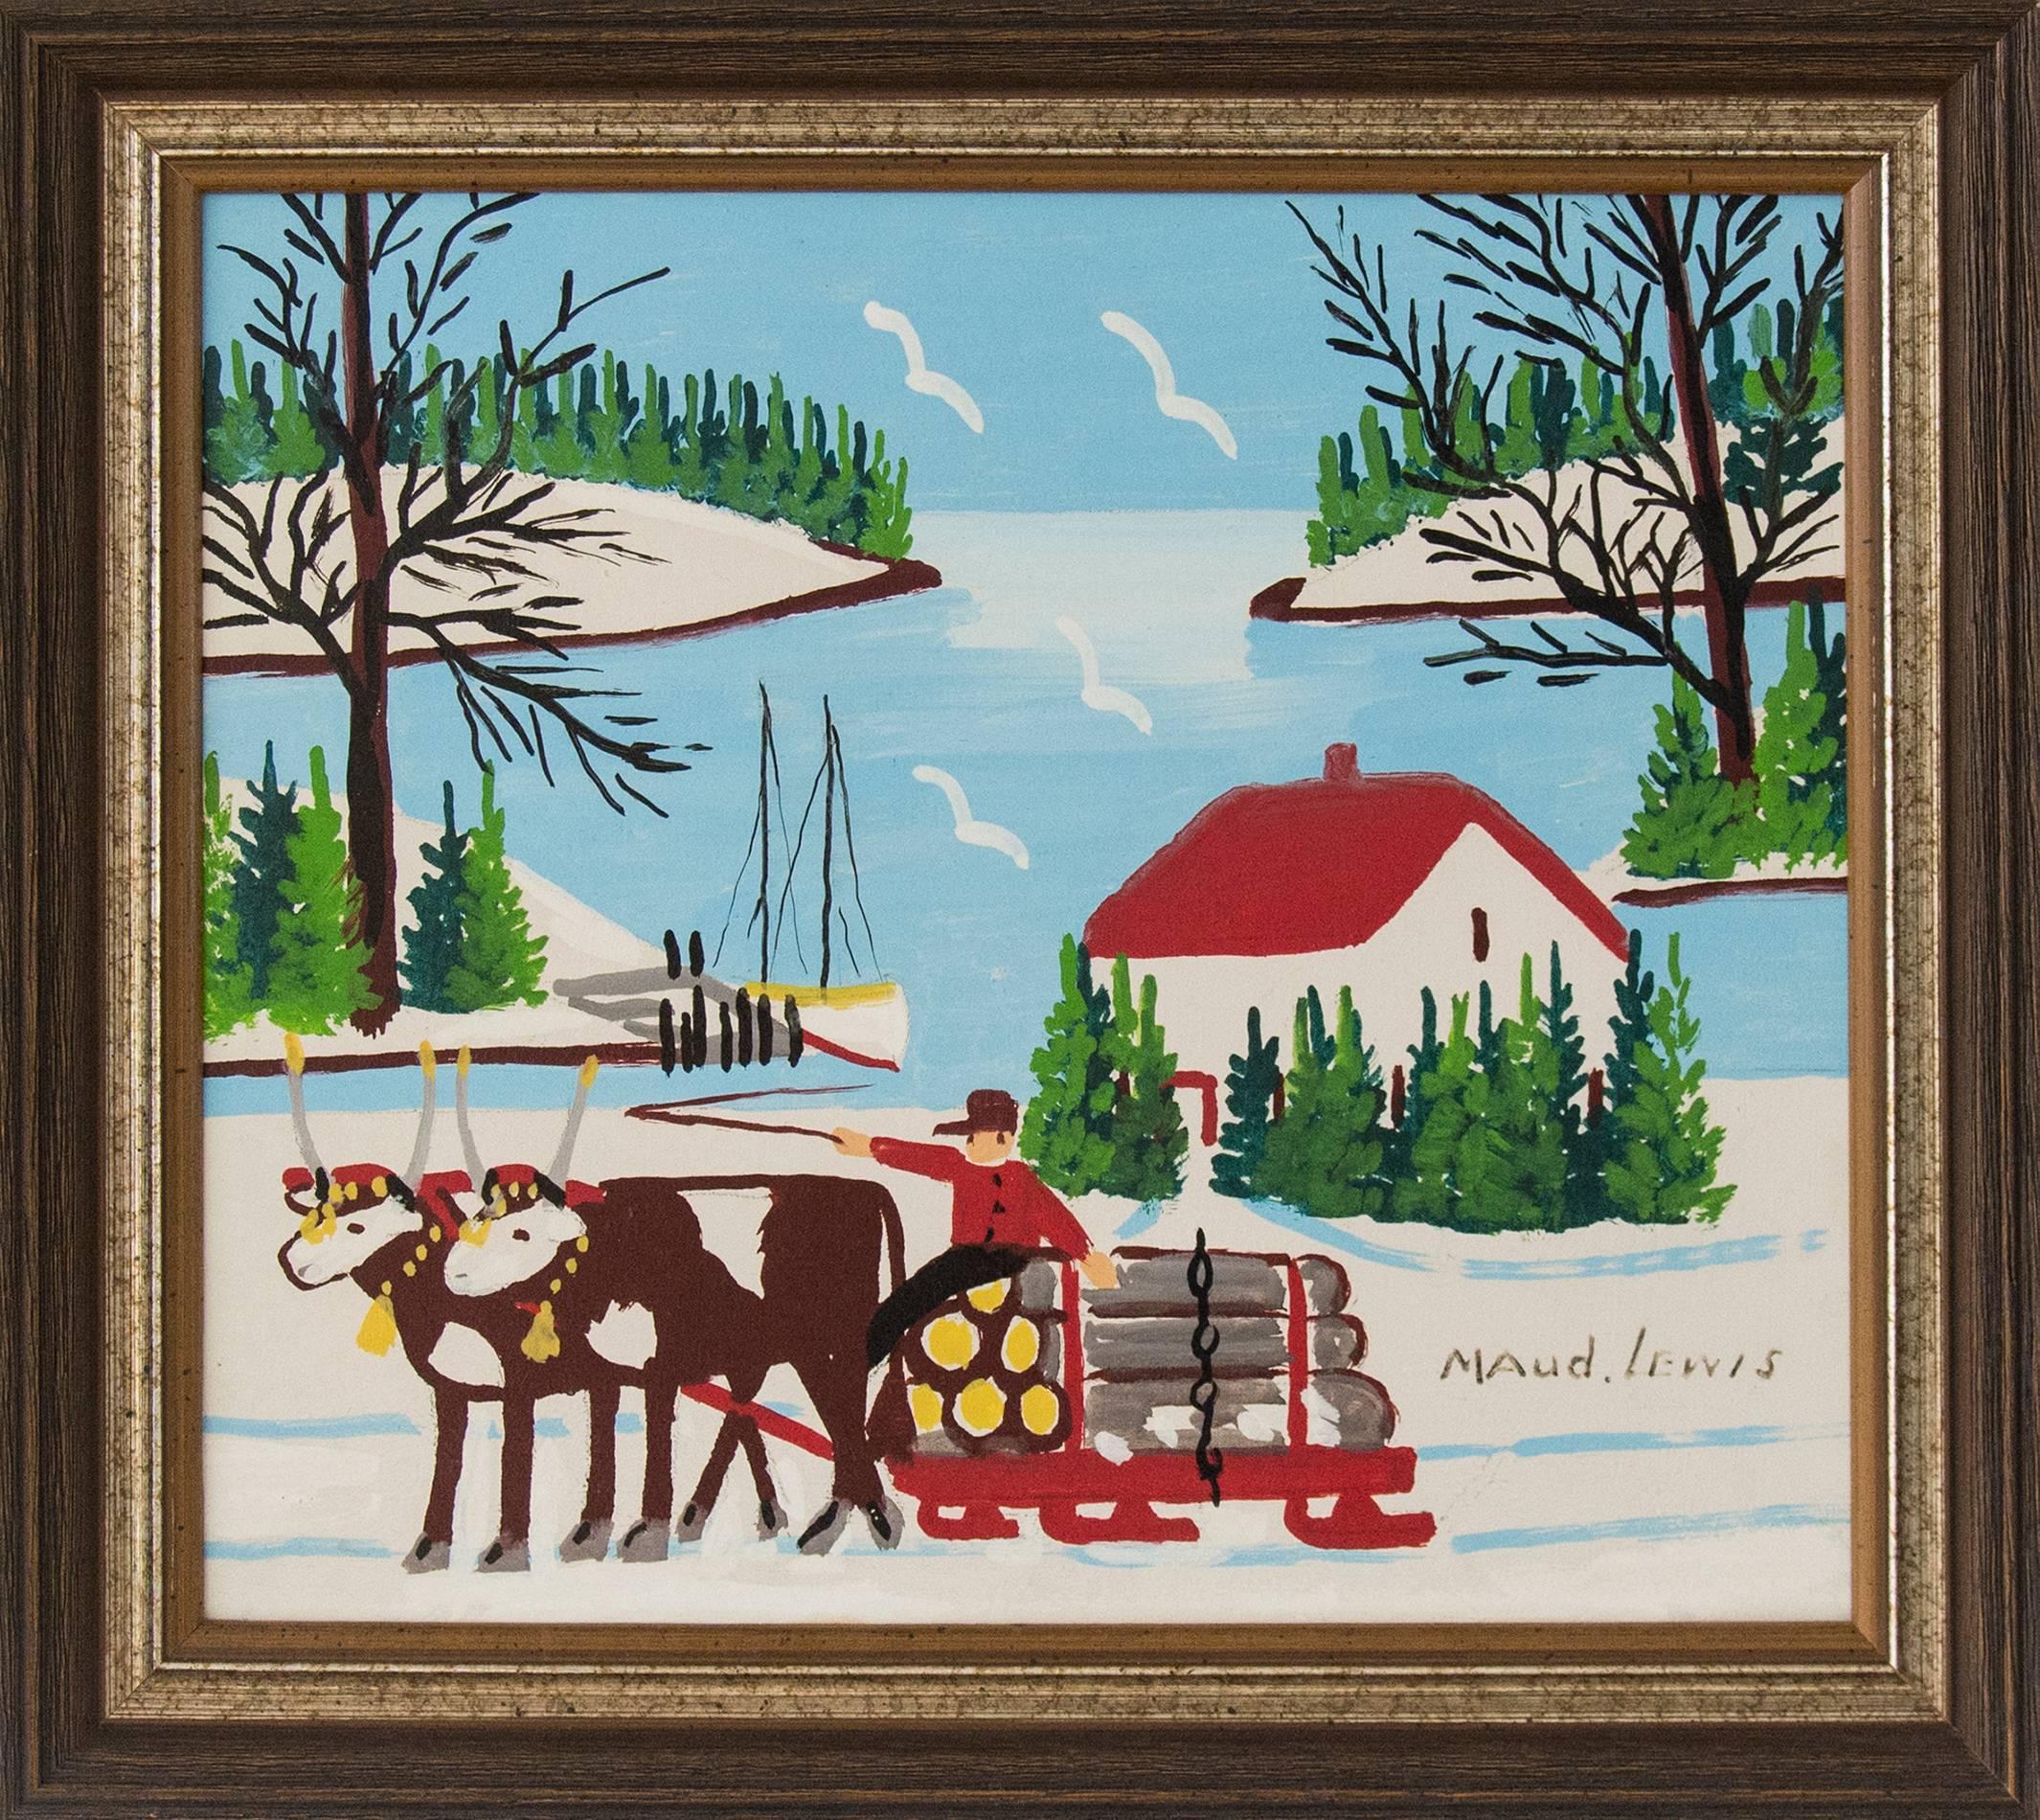 Oxen Hauling Logs - Painting by Maud Lewis